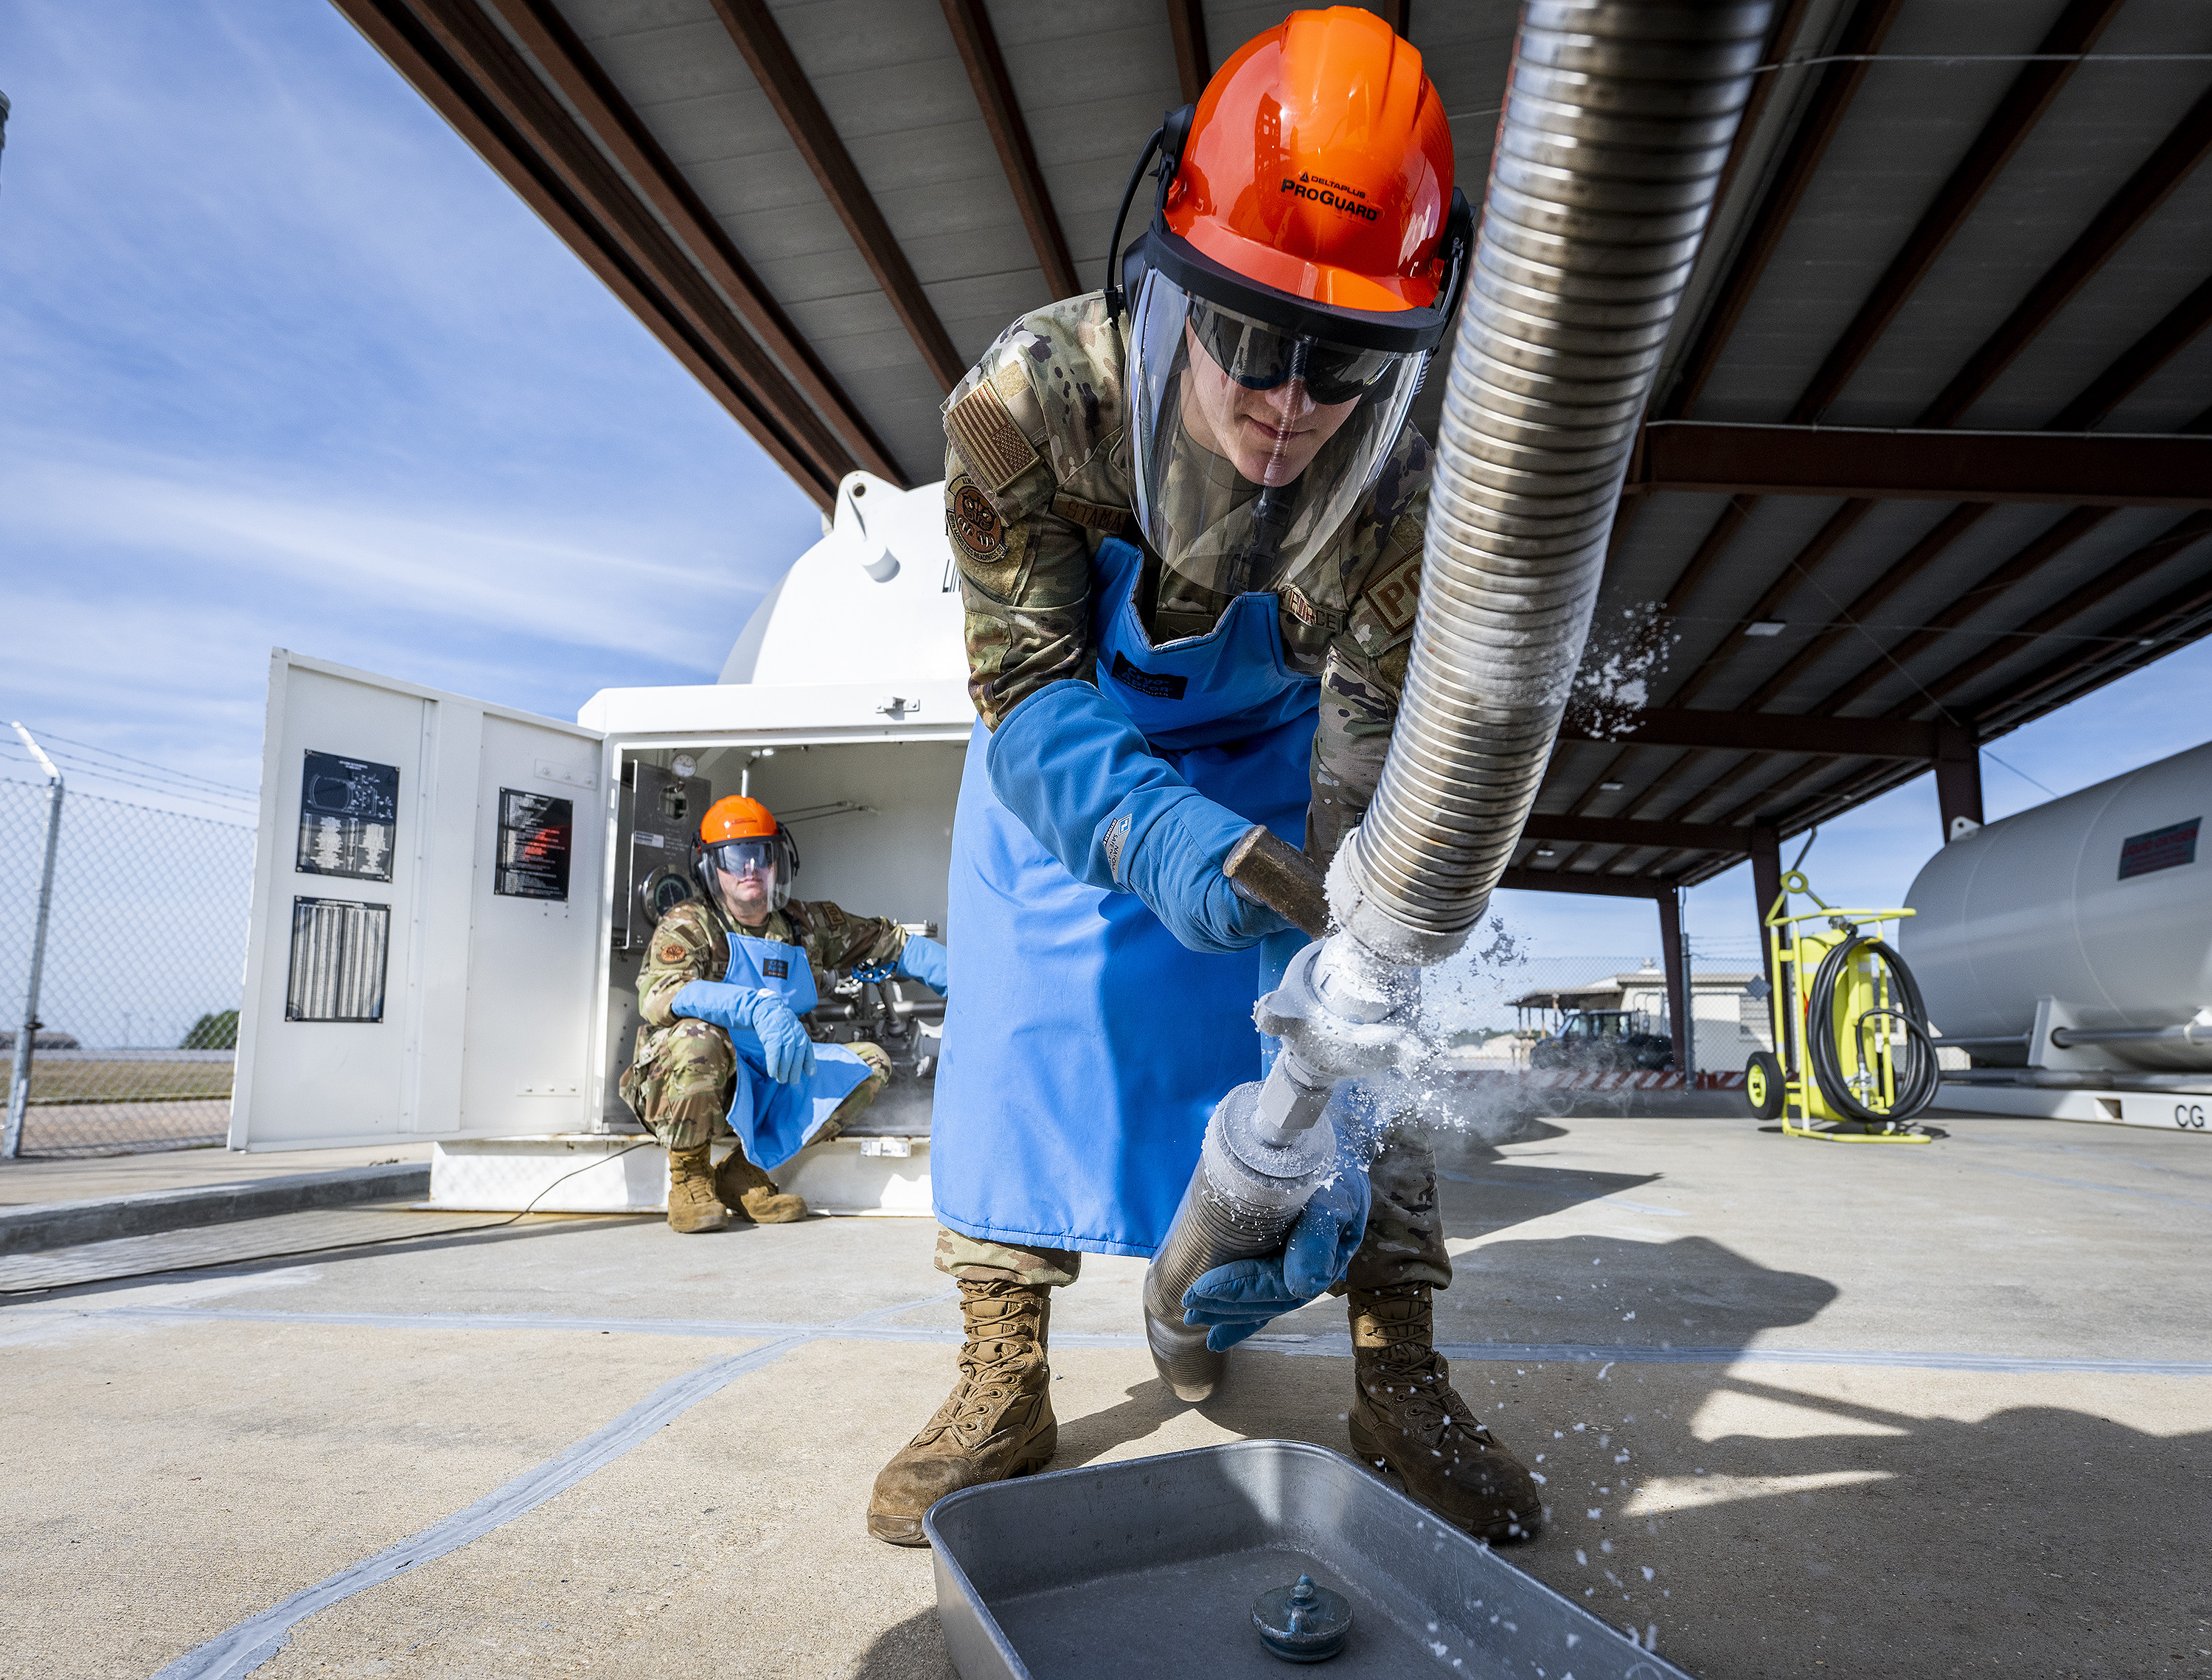 Image: Senior Airman Fred Stamatatos, 96th Fuels Management Flight, begins to detach the liquid nitrogen pipes after a transfer Dec. 7 at Eglin Air Force Base, Florida. The Airmen in charge of Eglin’s cryogenic storage saw a 1,400 % increase in their intake and output of liquid nitrogen over a three-month period due to a climatic munitions test. The team issued 19,000 gallons compared to an average of 2,100 cryogenic fuels during that window. Credit: U.S. Air Force photo/Samuel King Jr.